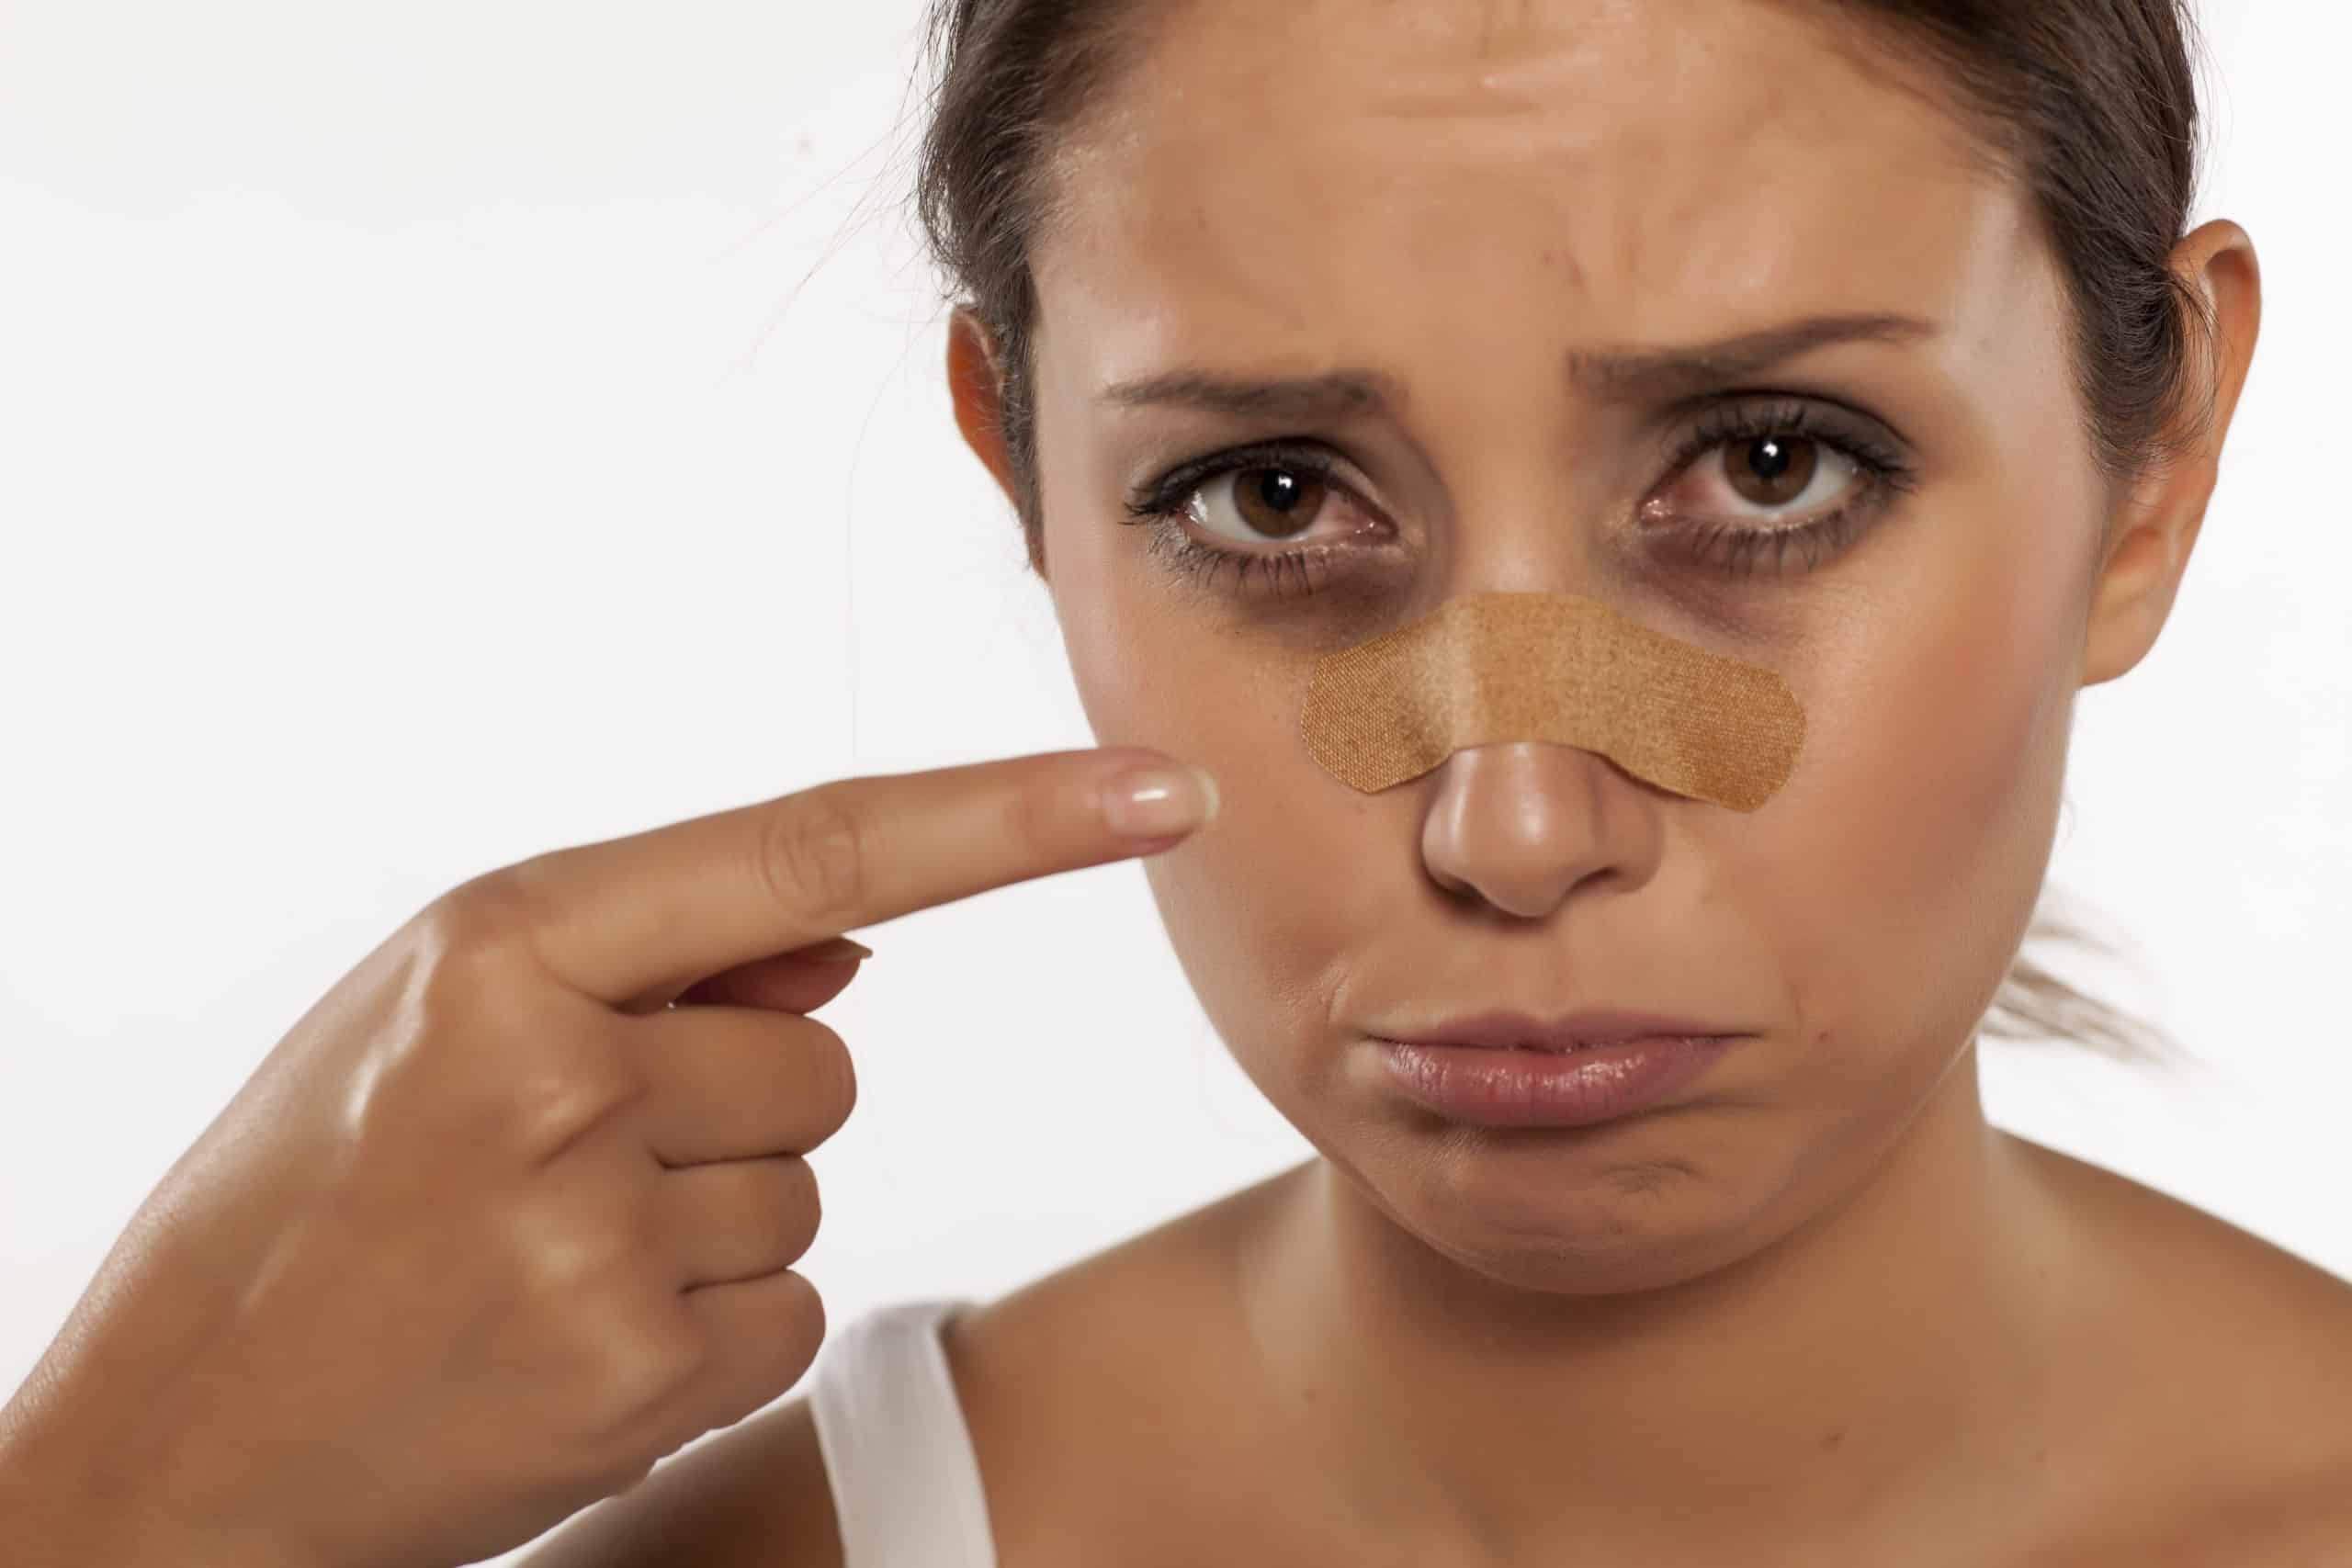 woman with band aid on nose and pouting face with white background